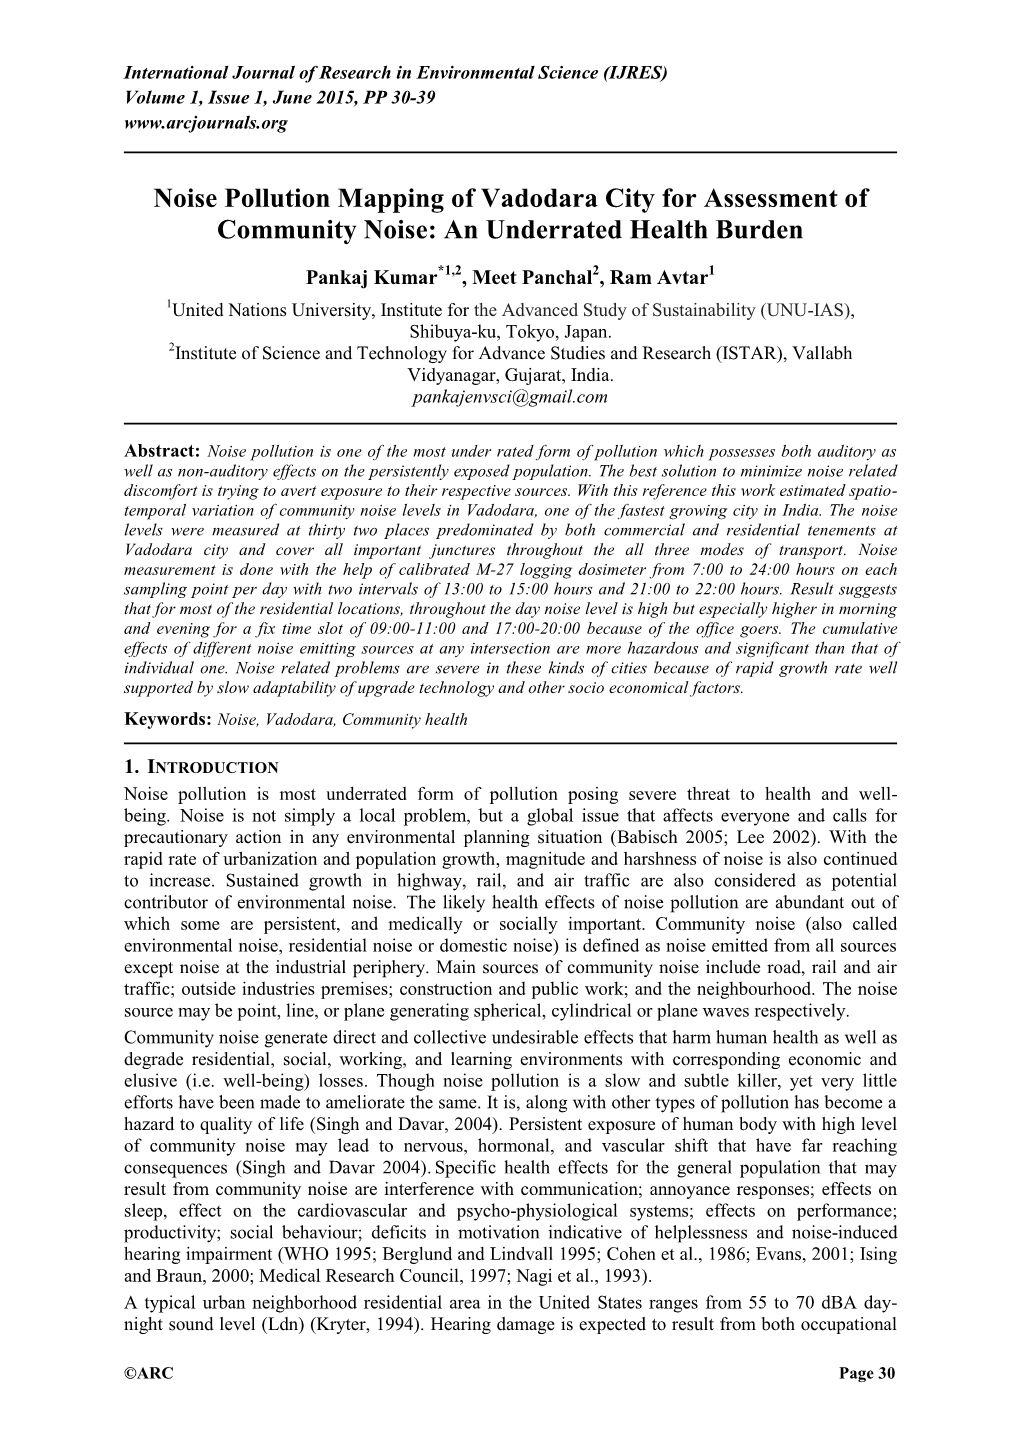 Noise Pollution Mapping of Vadodara City for Assessment of Community Noise: an Underrated Health Burden